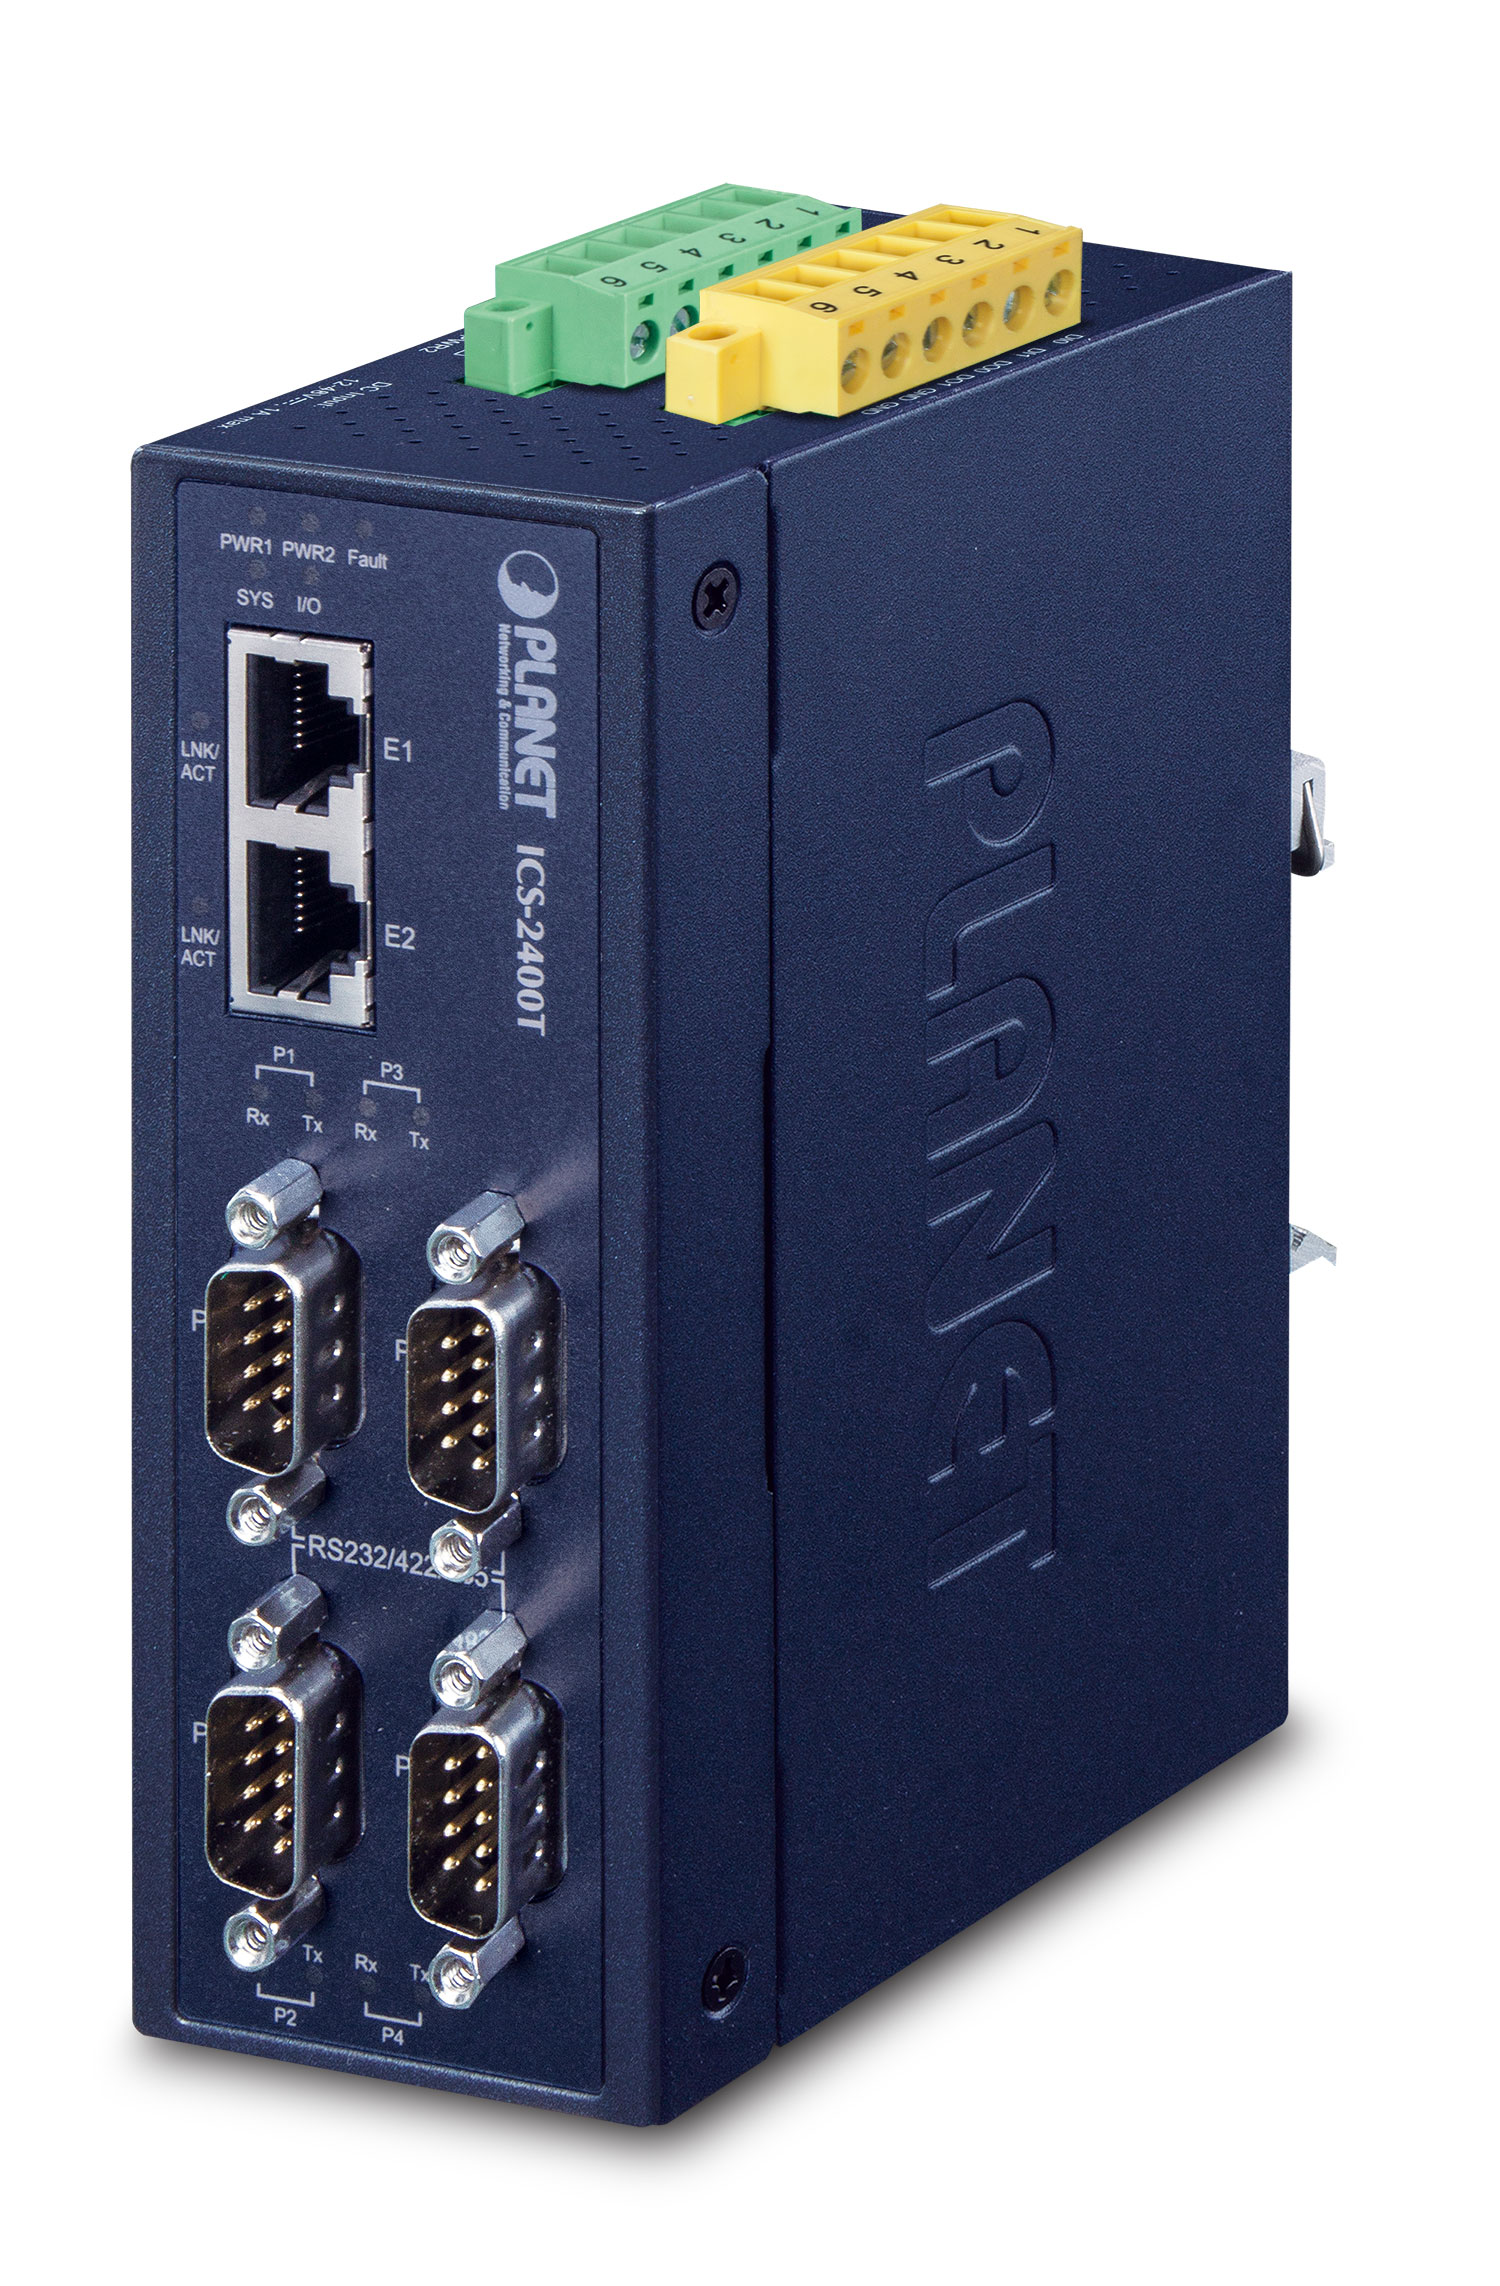 【ICS-2400T】Industrial 4-Port RS232/RS422/RS485 Serial Device Server